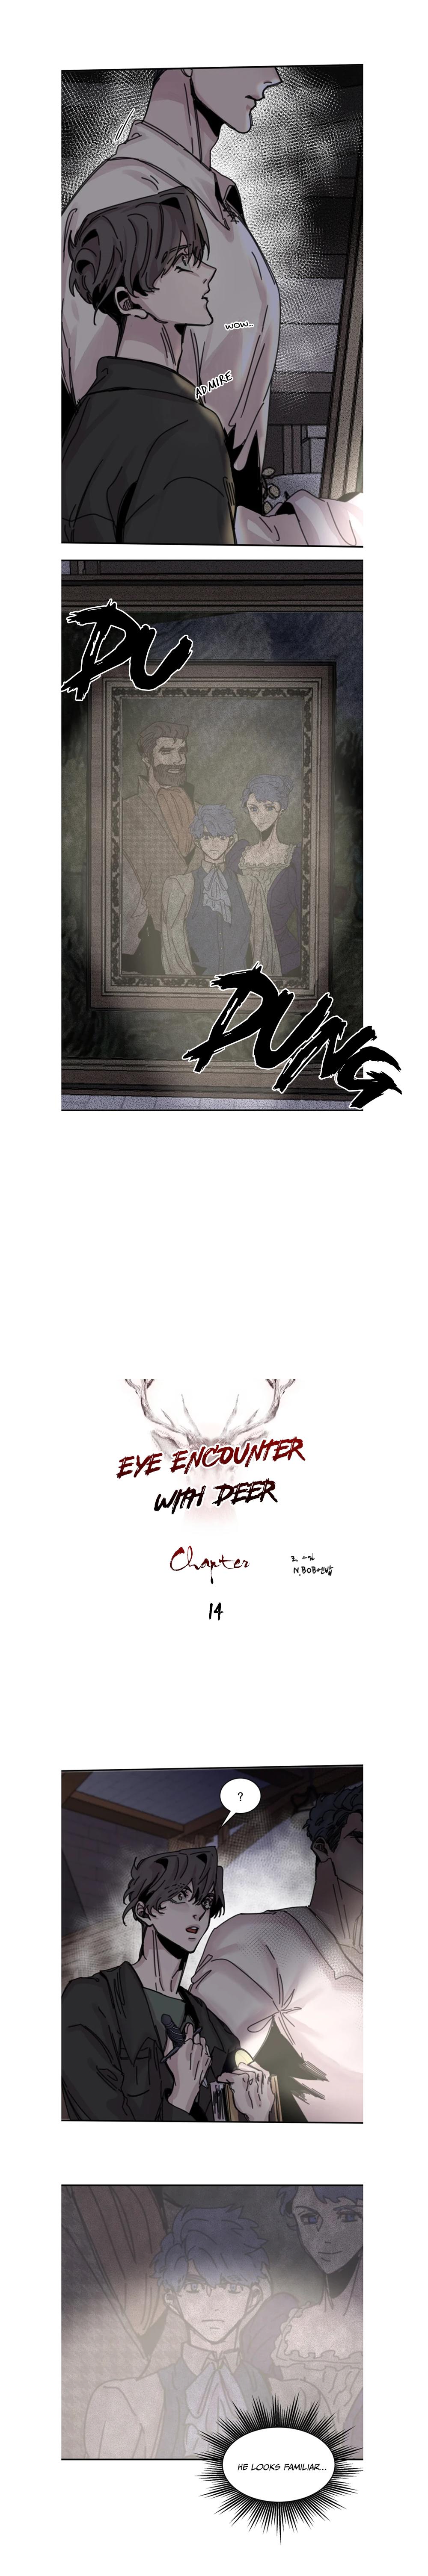 Eye Encounter With The Deer - Page 2